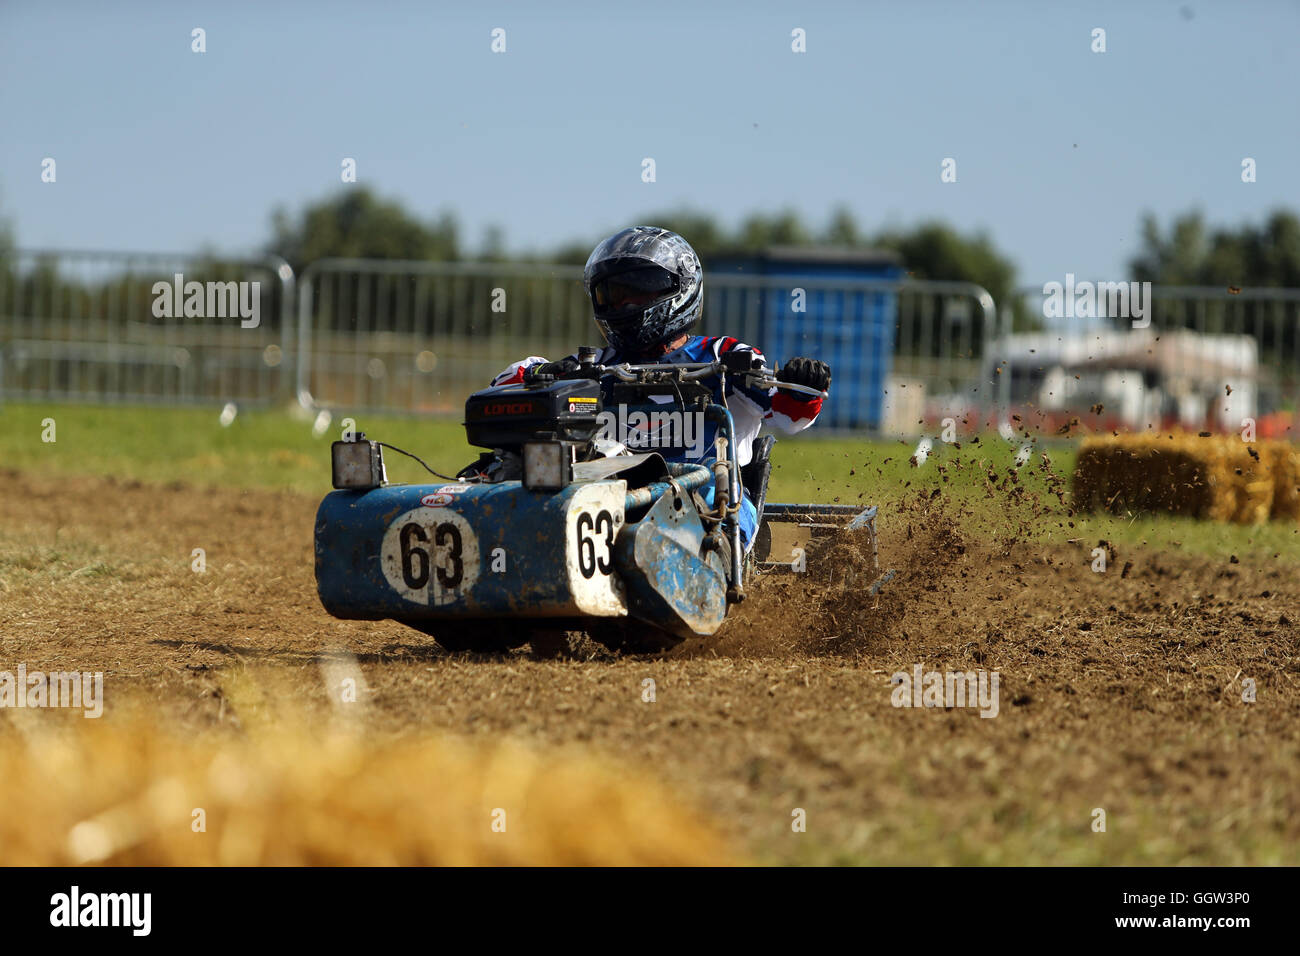 Teams qualify ahead of the 12 hour lawn mower race - which commences at 8pm - at Five Oaks, West Sussex. Stock Photo